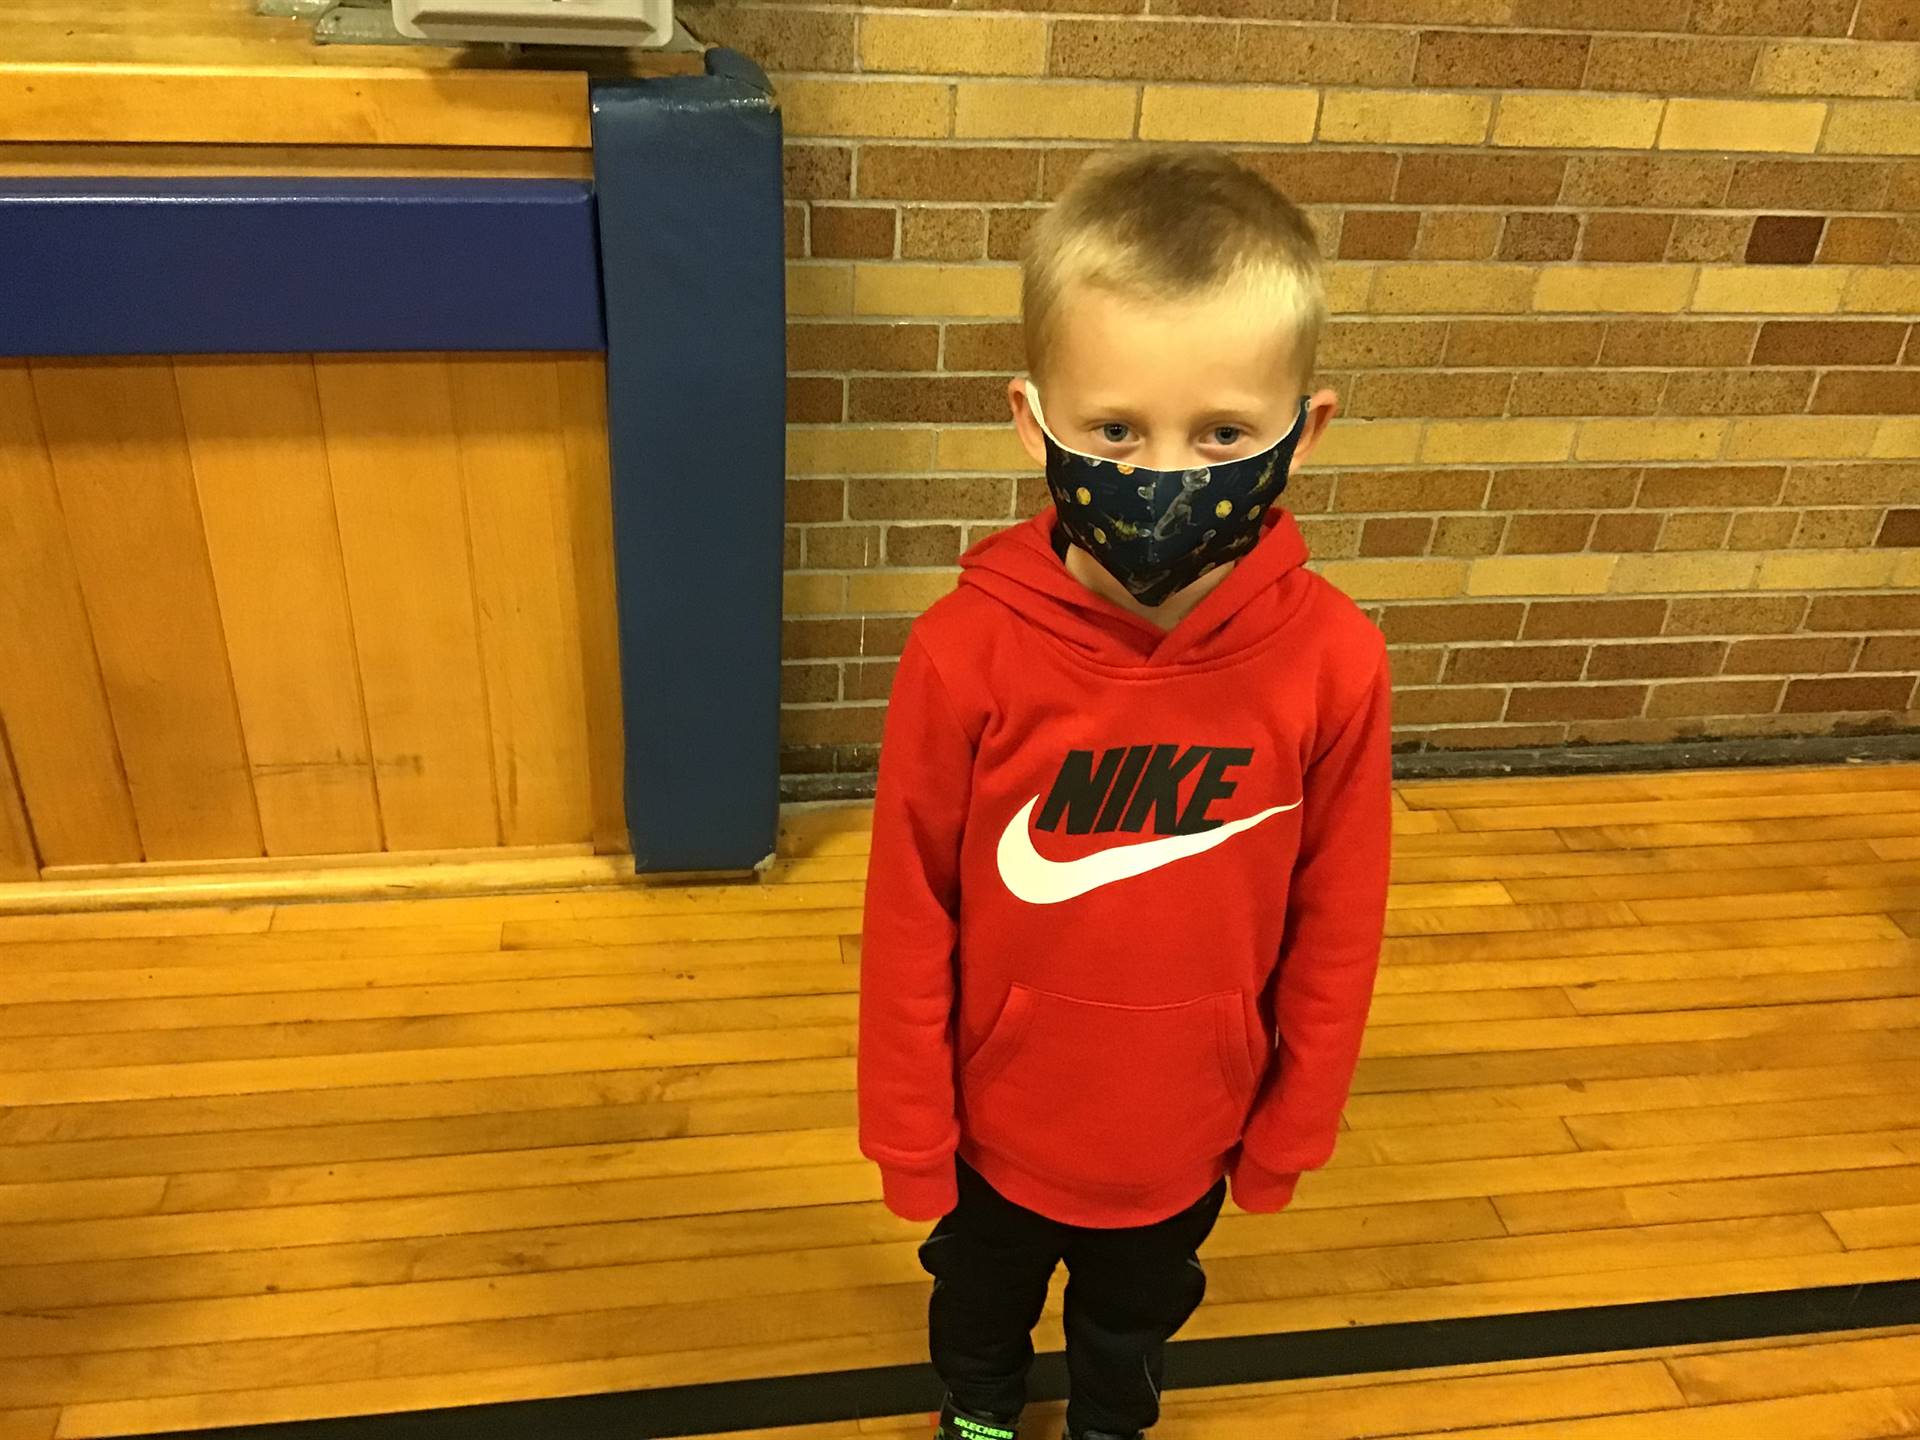 A student shows safe mask wearing